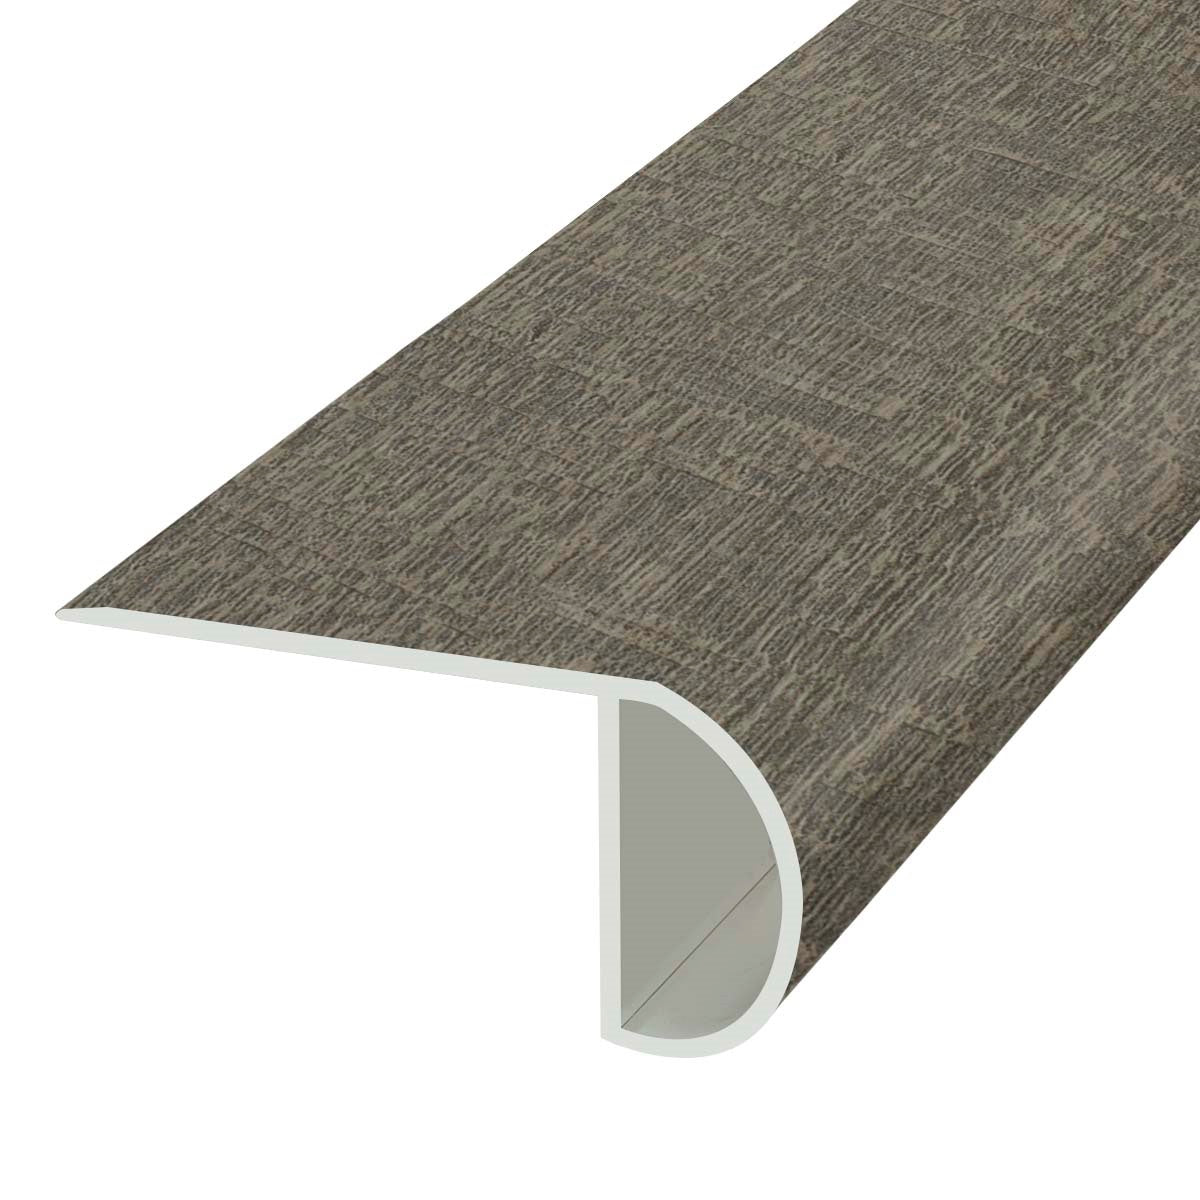 Silver Creek 1.03 in. Thick x 2.23 in. Width x 94 in. Length Overlap Vinyl Stair Nose